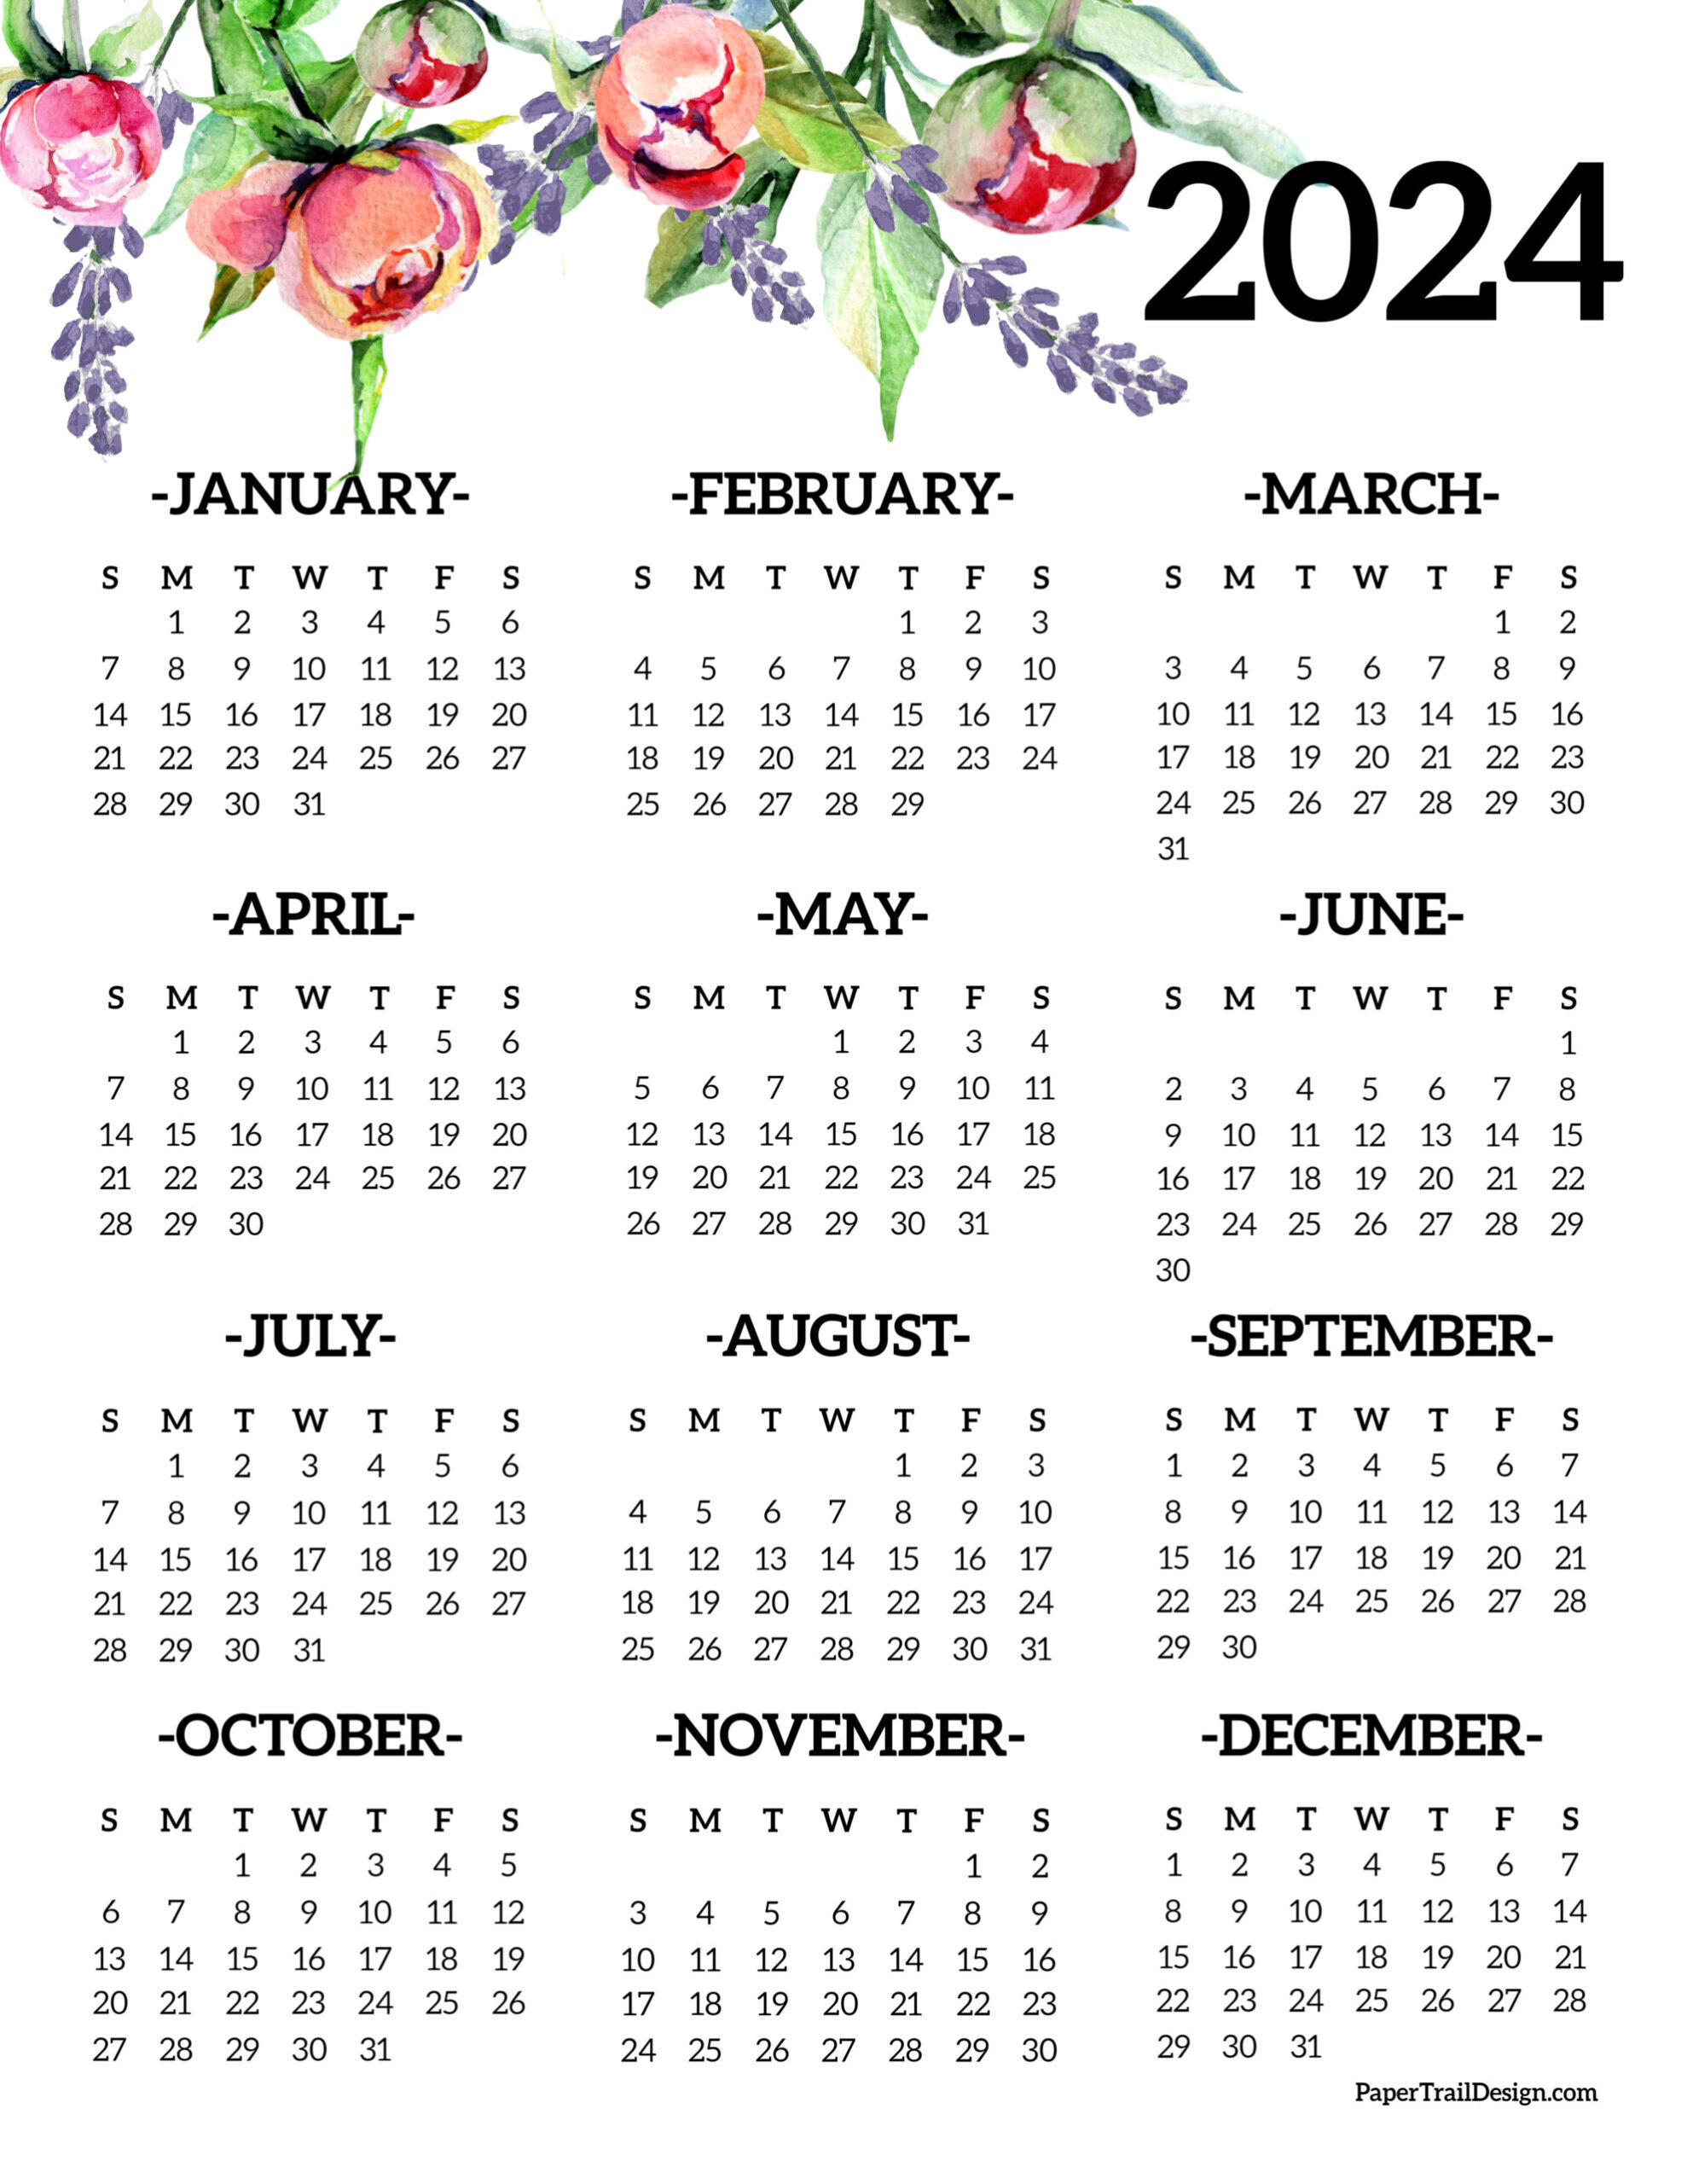 Calendar 2024 Printable One Page - Paper Trail Design for 2024 Printable Yearly Calendar One Page